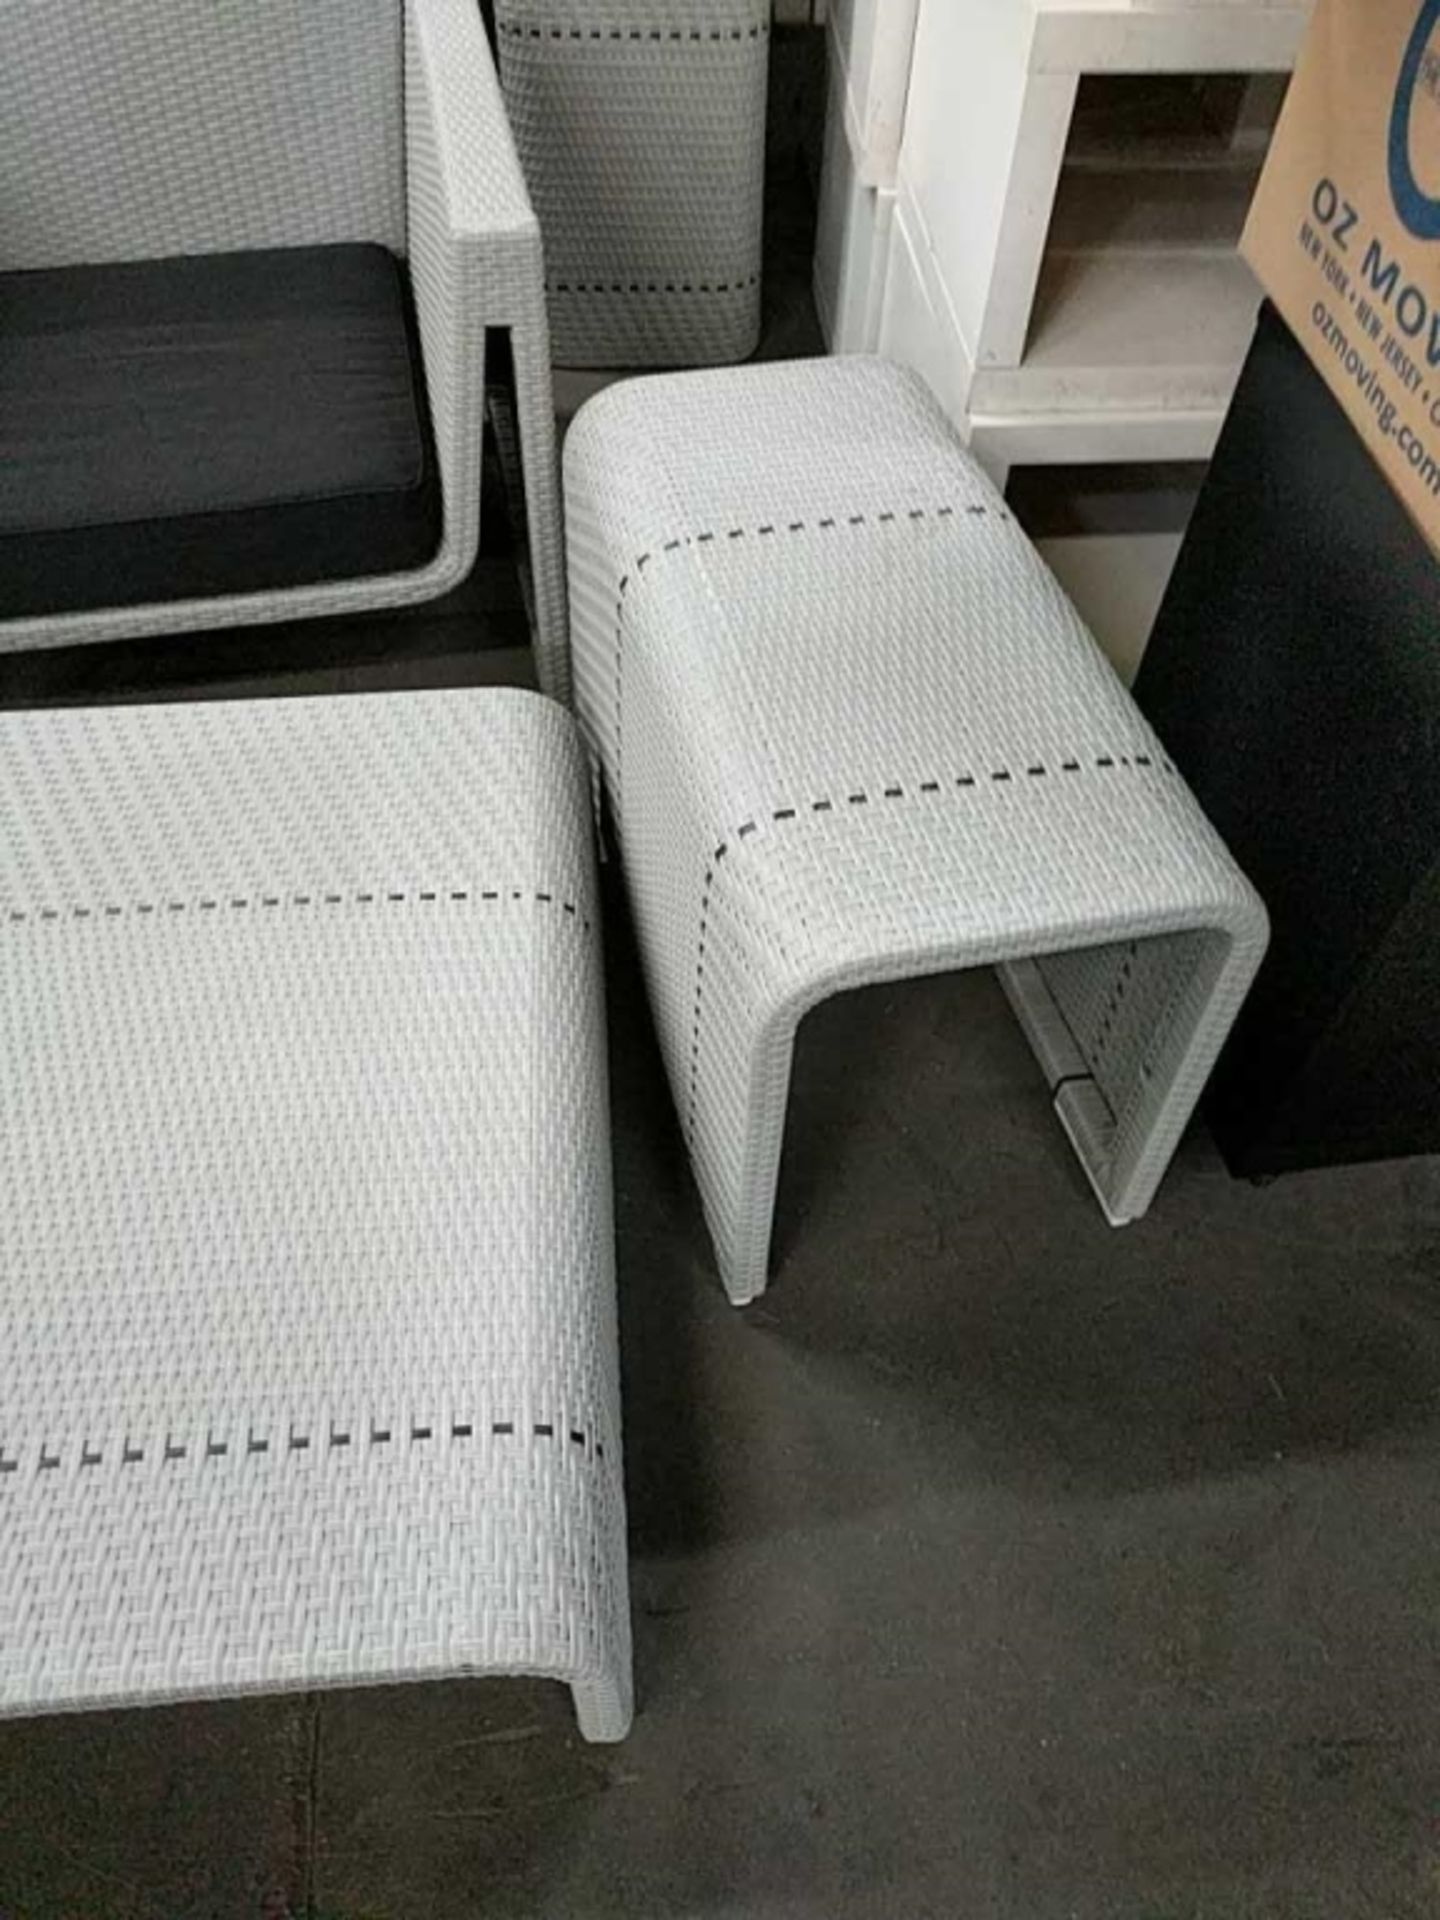 4 Piece set of Outdoor Wicker Furniture - Image 3 of 6